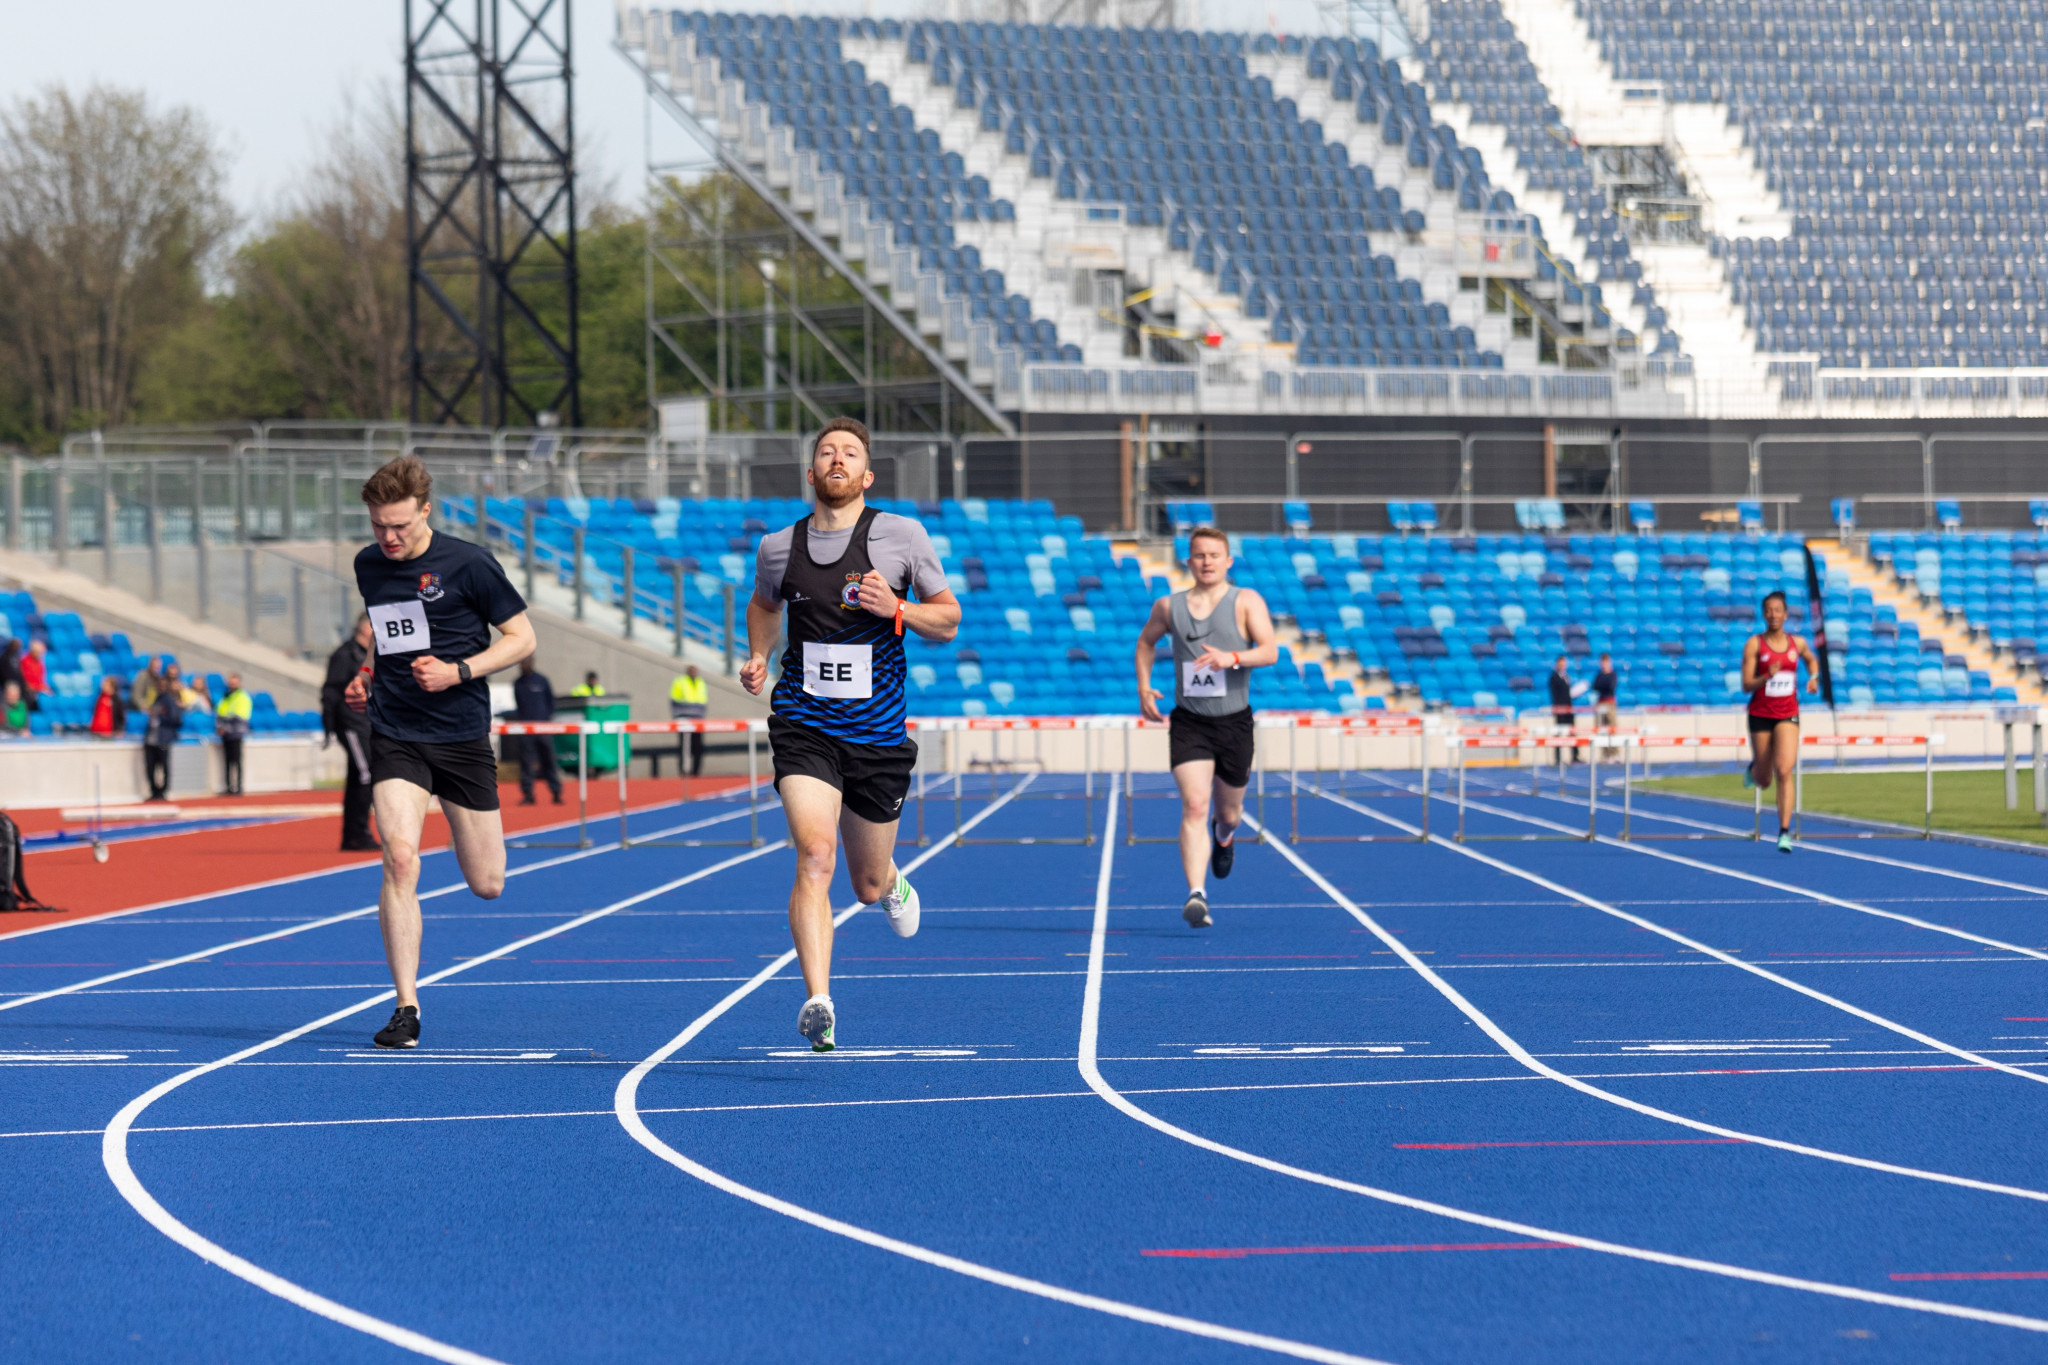 The Alexander Stadium staged the UK Midlands Army Athletics Championships as part of preparations for the Commonwealth Games ©Birmingham City Council